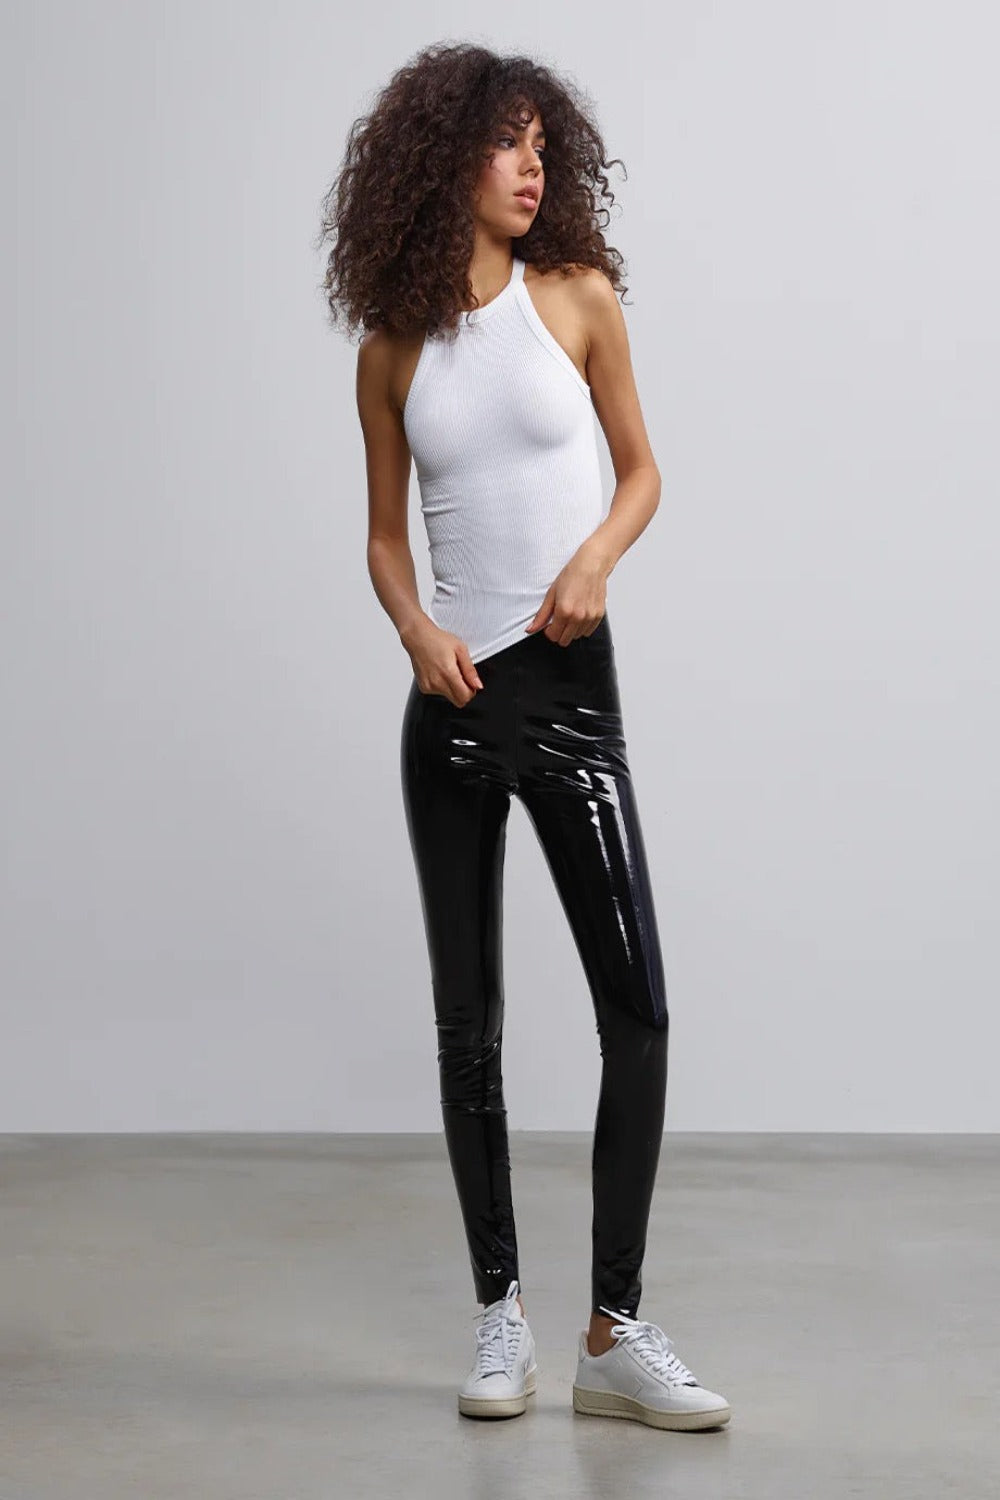 Spanx Faux Leather Legging in Black – Research and Design